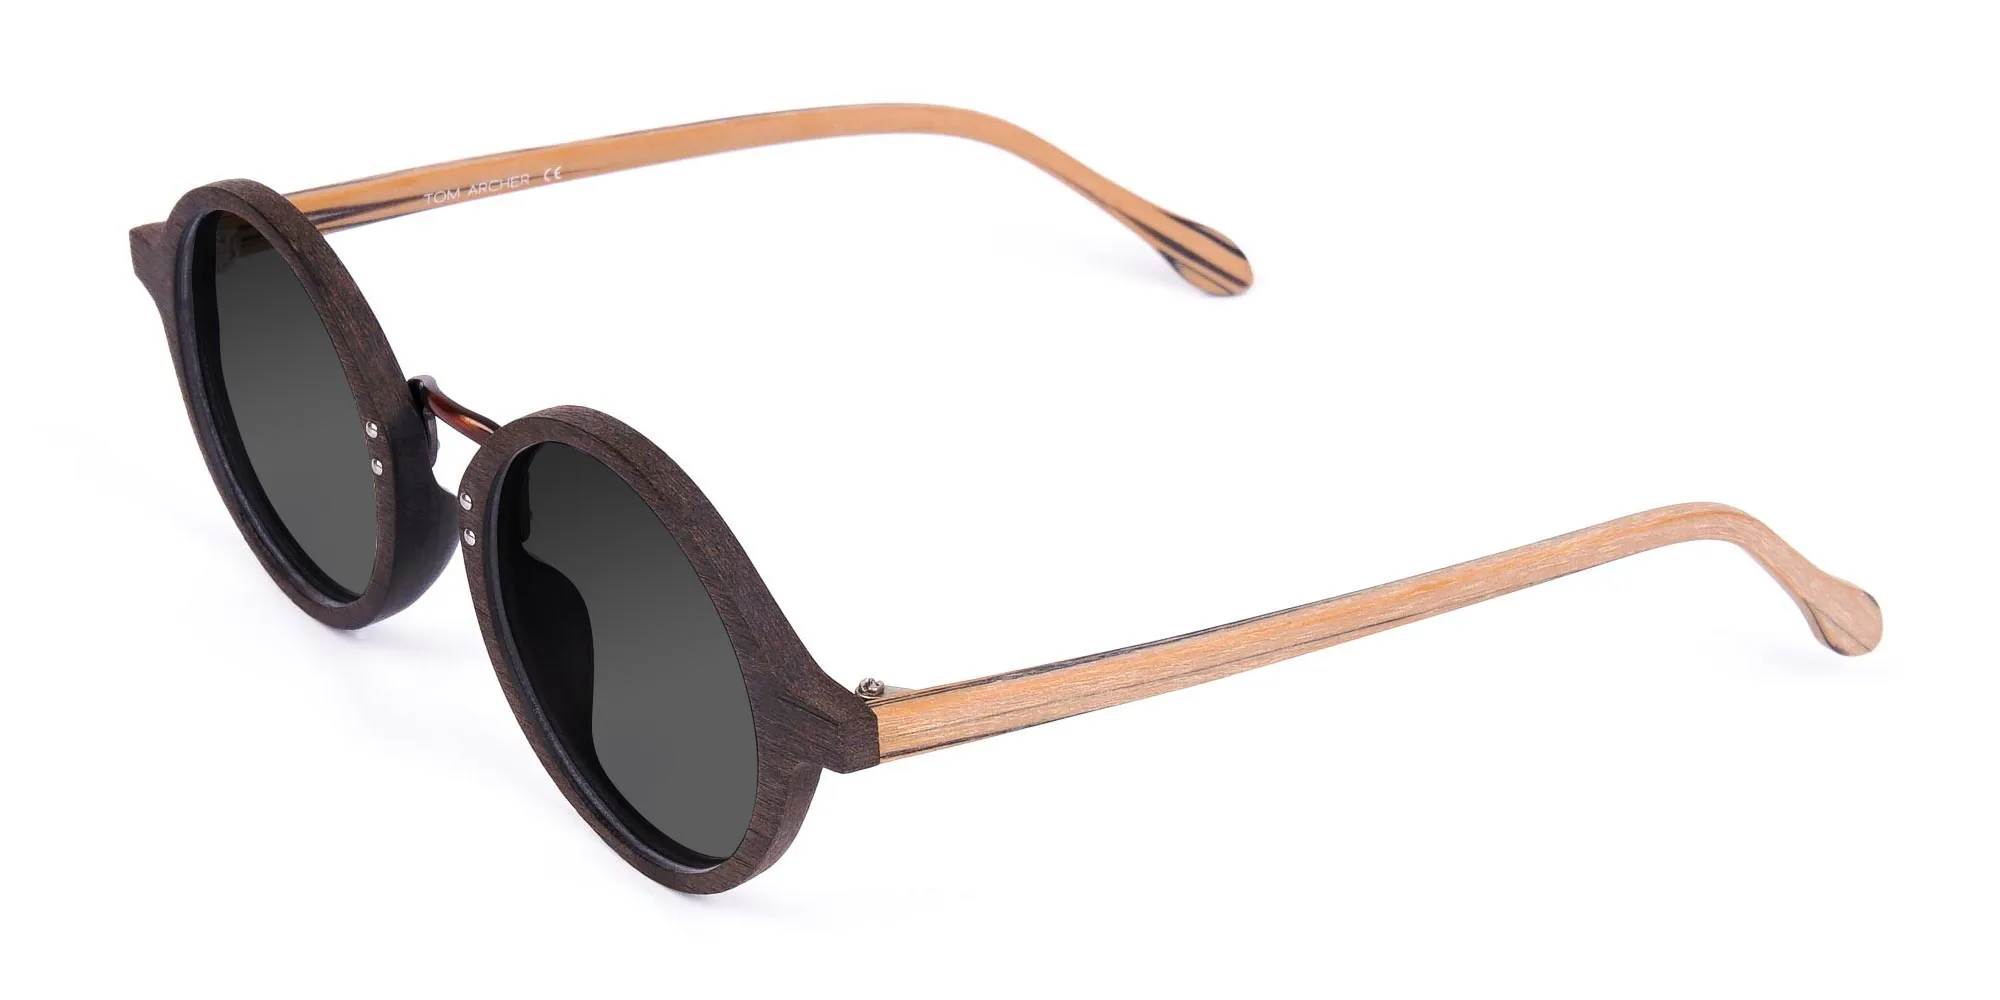 Brown-Wood-Frame-Sunglasses-with-Grey-Tint-2